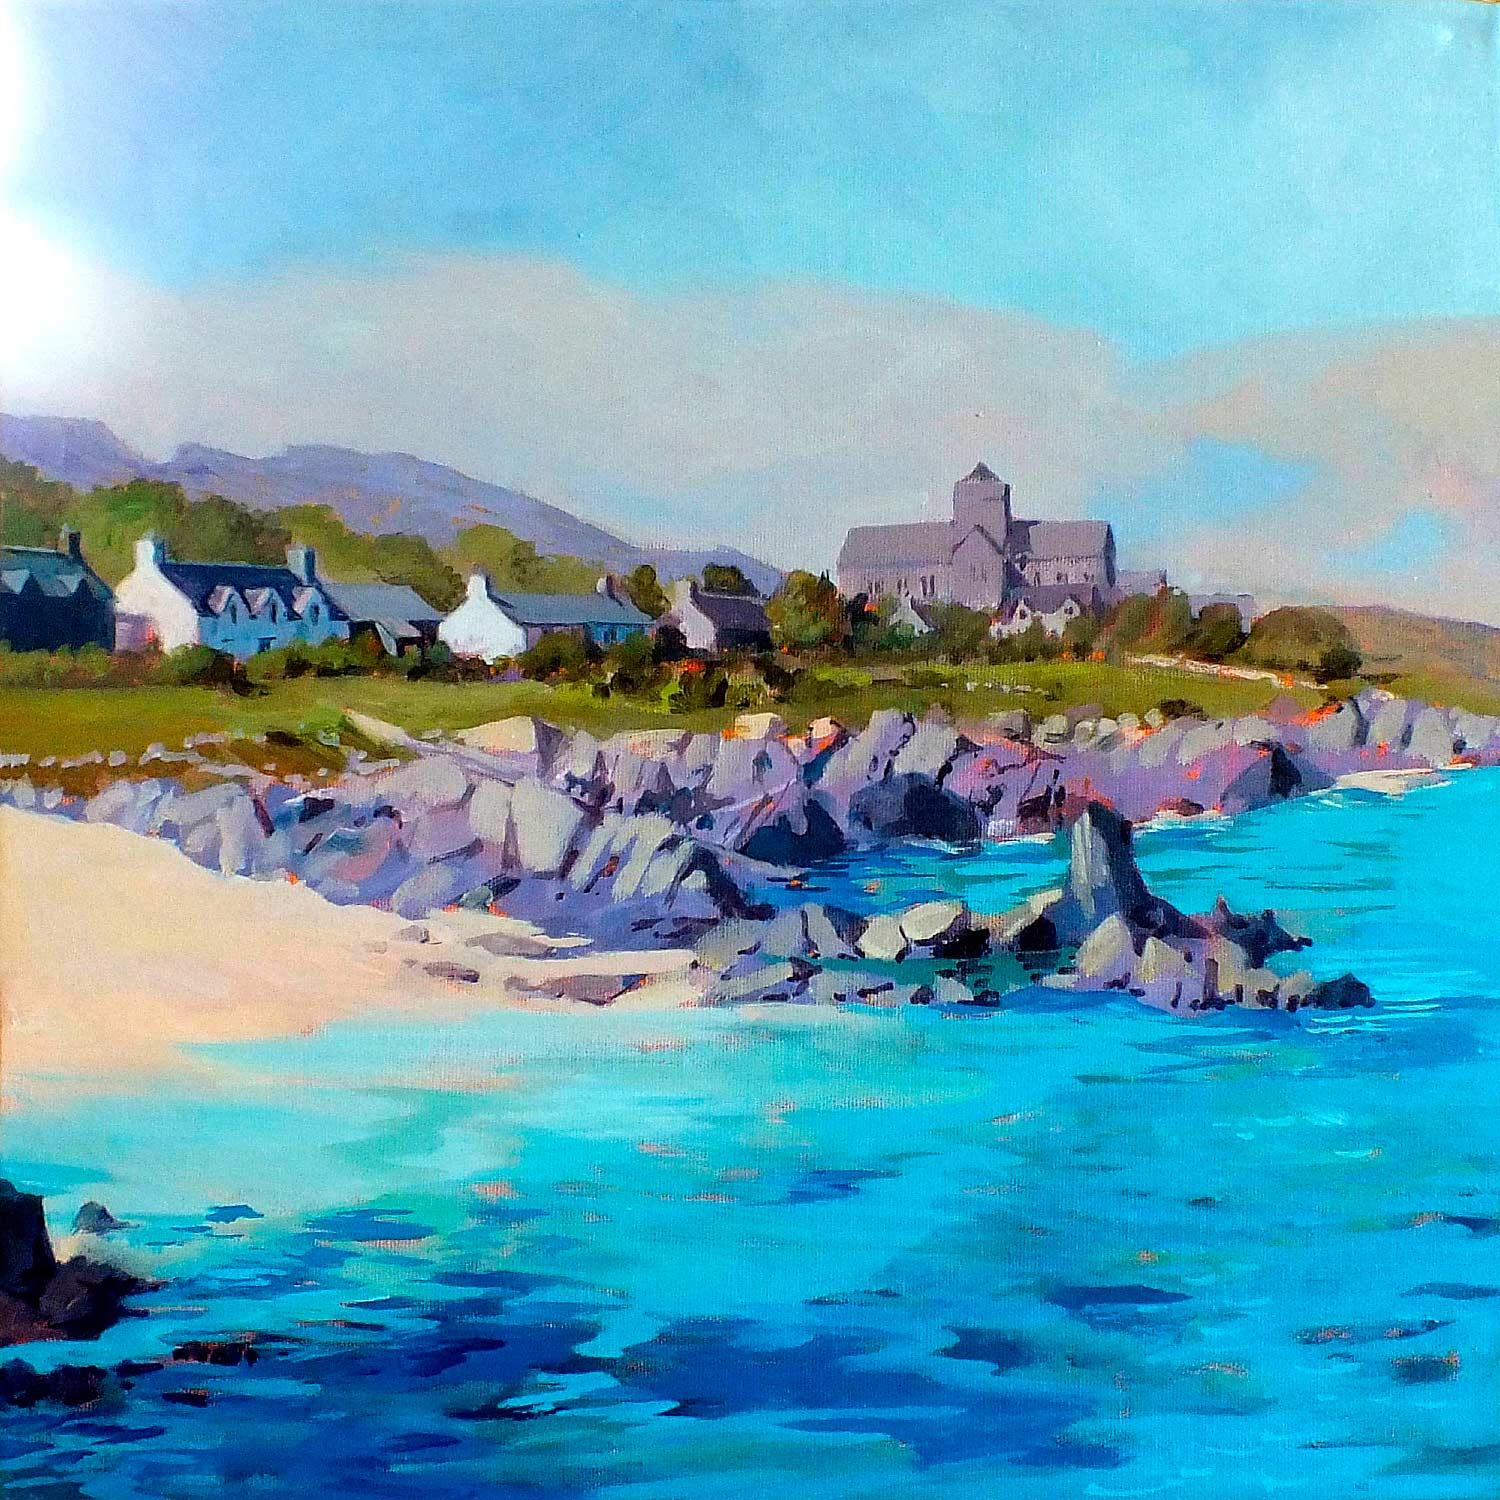 Iona Blues by Margaret Evans